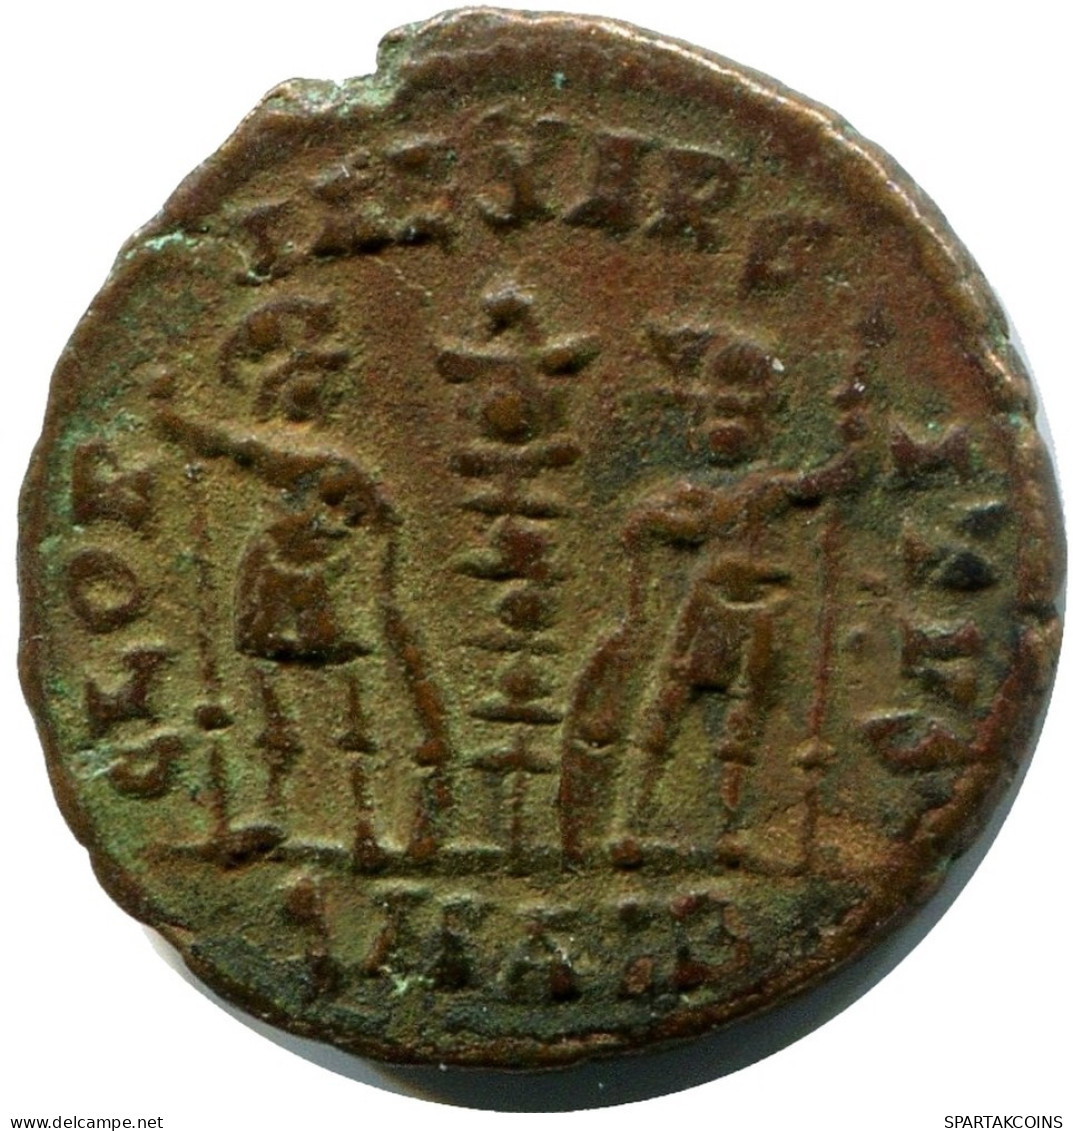 CONSTANS MINTED IN ALEKSANDRIA FROM THE ROYAL ONTARIO MUSEUM #ANC11394.14.D.A - The Christian Empire (307 AD To 363 AD)